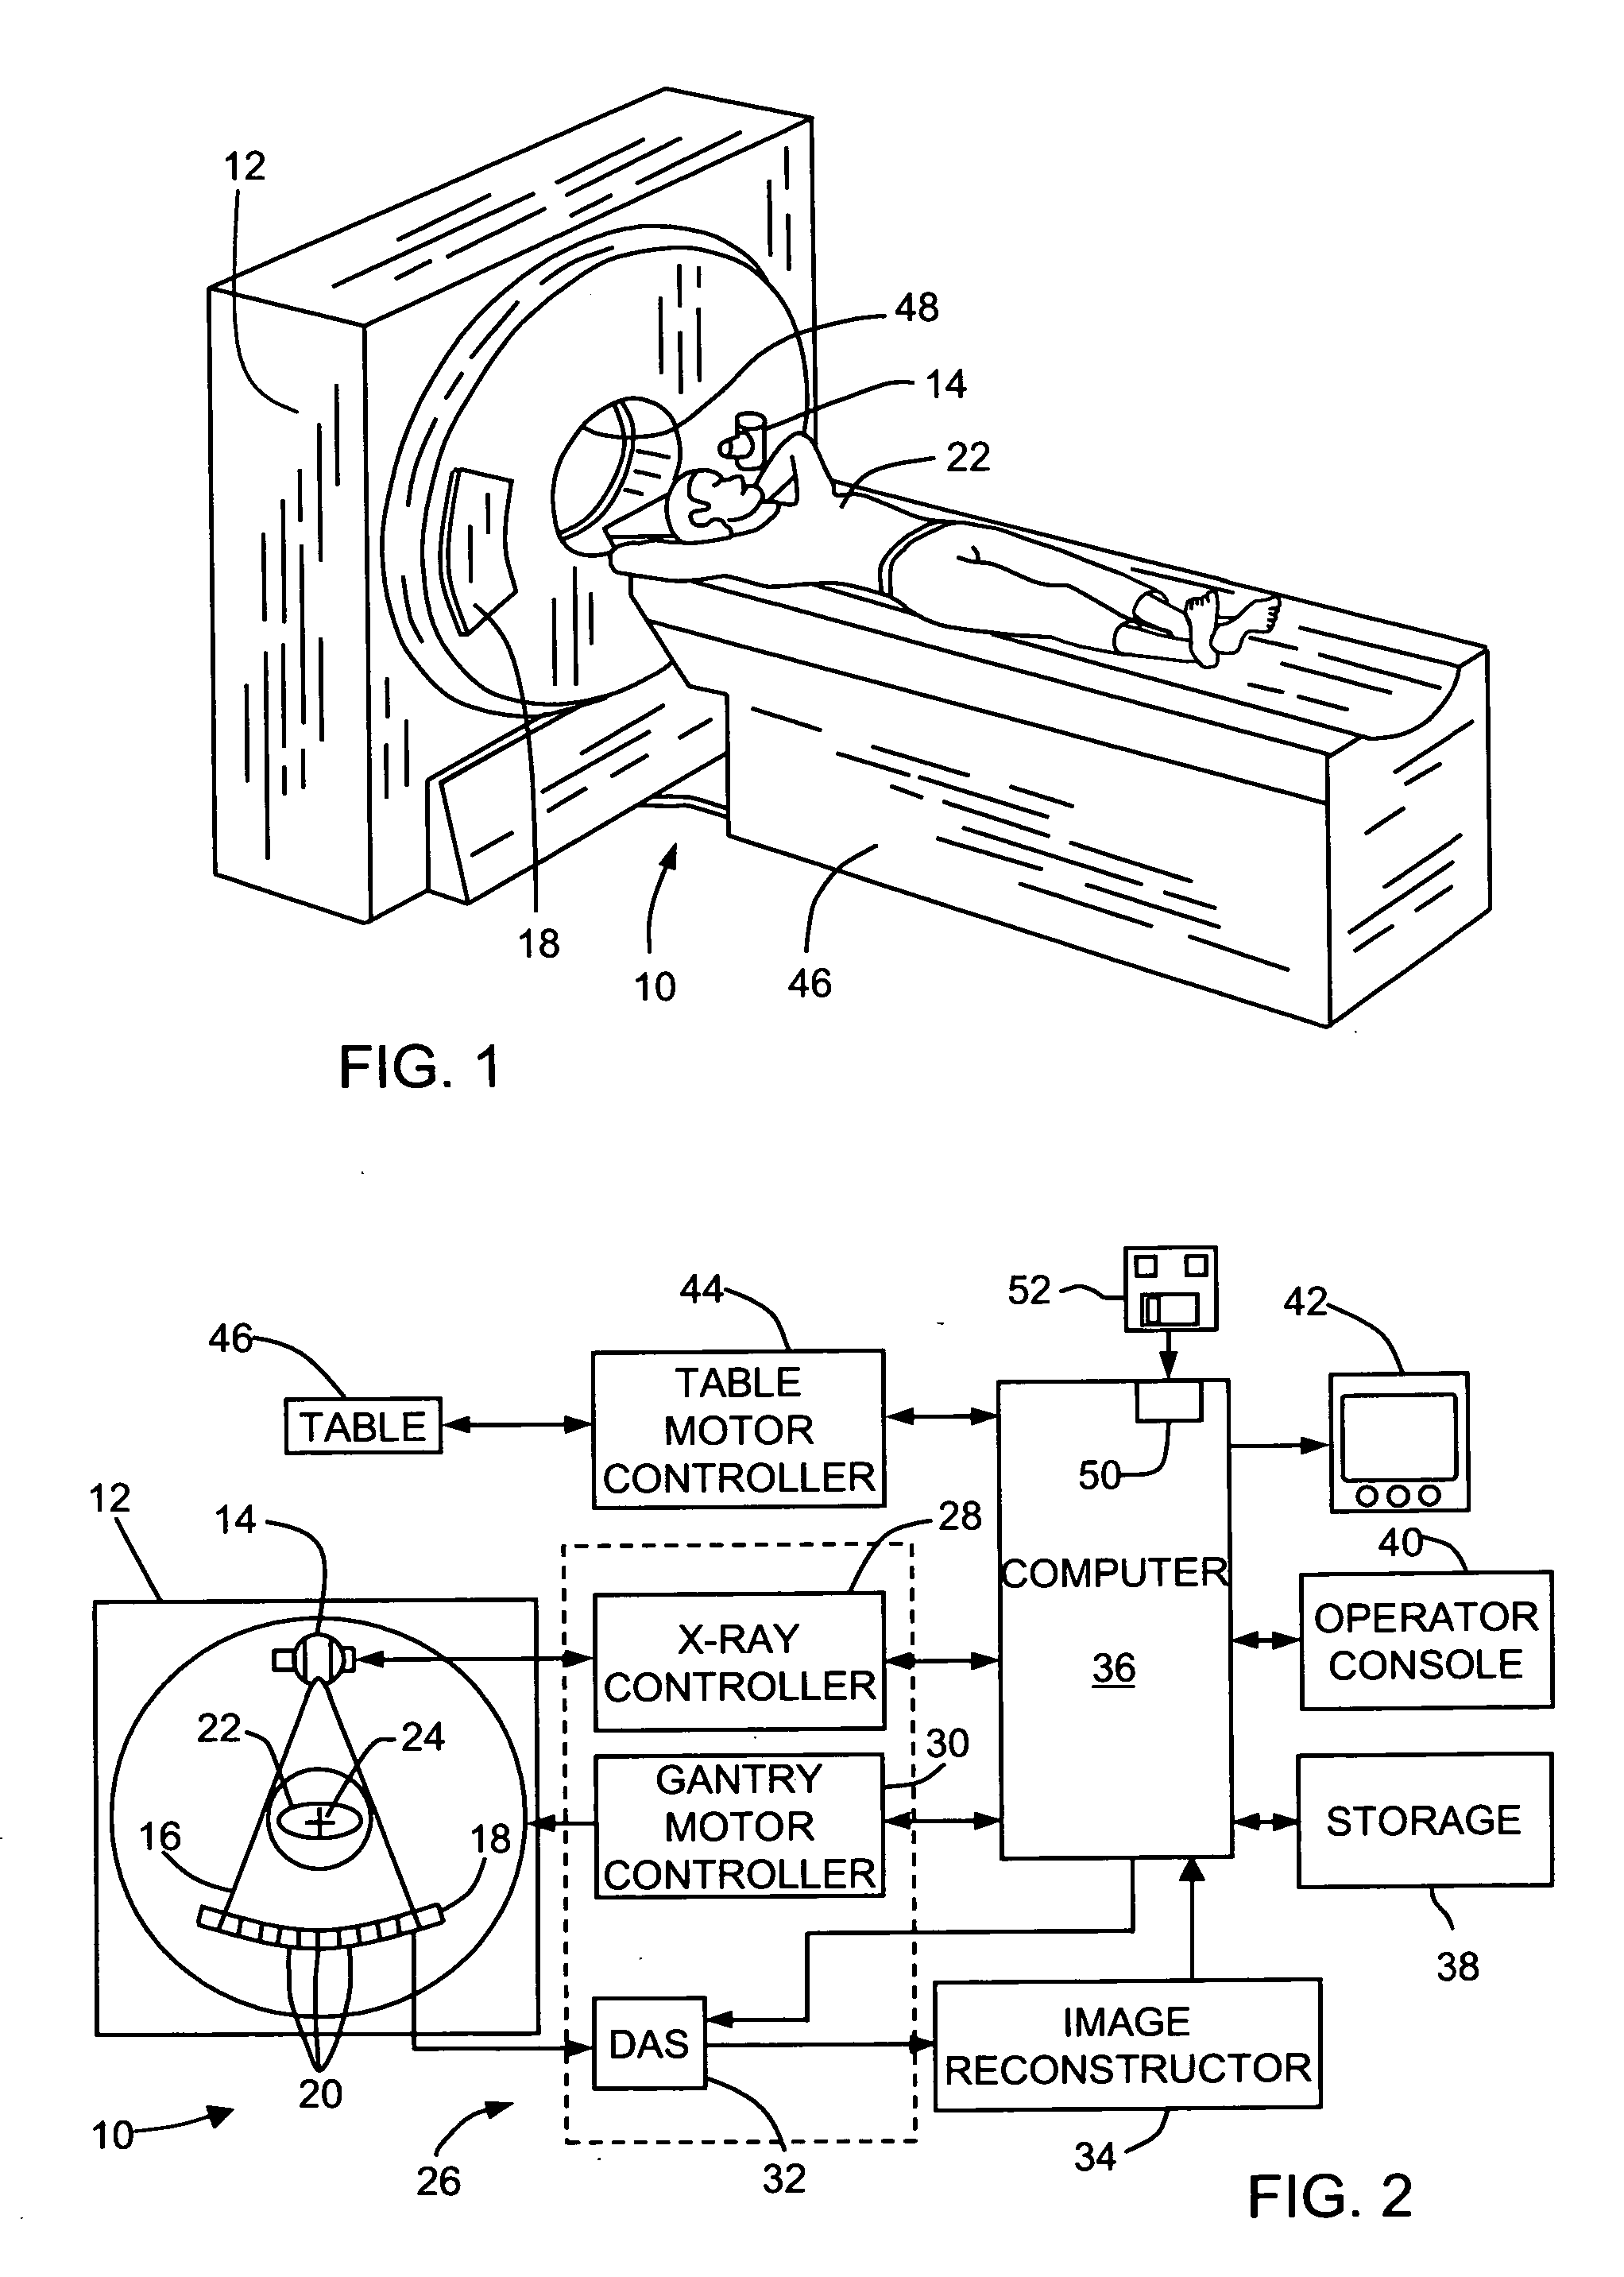 Method and apparatus for correcting for beam hardening in CT images